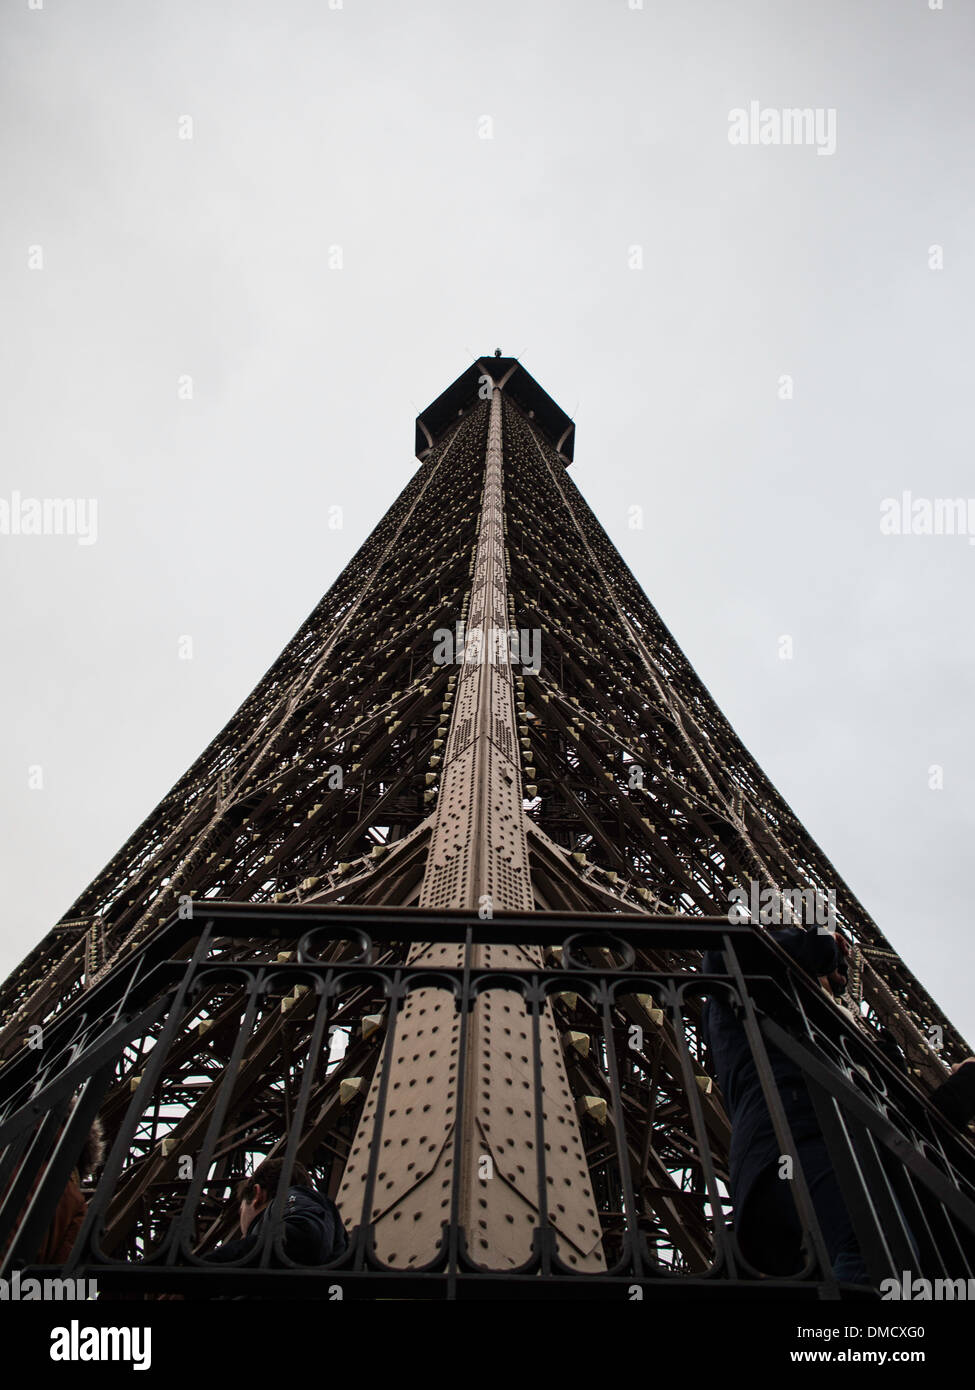 Eiffel tower structure view from side upwards Stock Photo